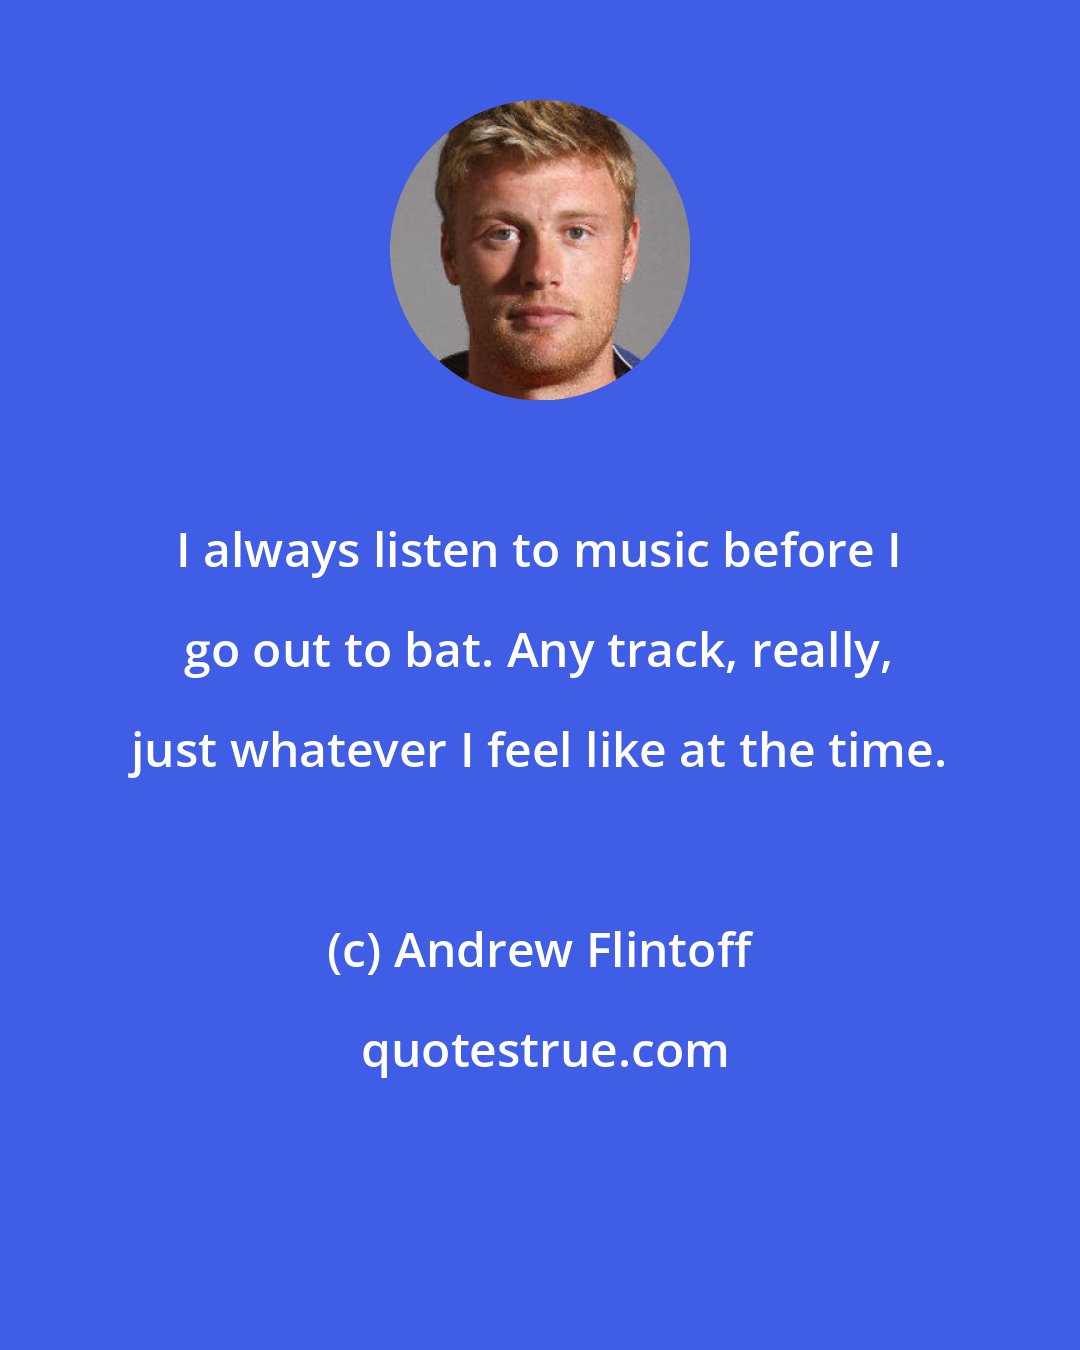 Andrew Flintoff: I always listen to music before I go out to bat. Any track, really, just whatever I feel like at the time.